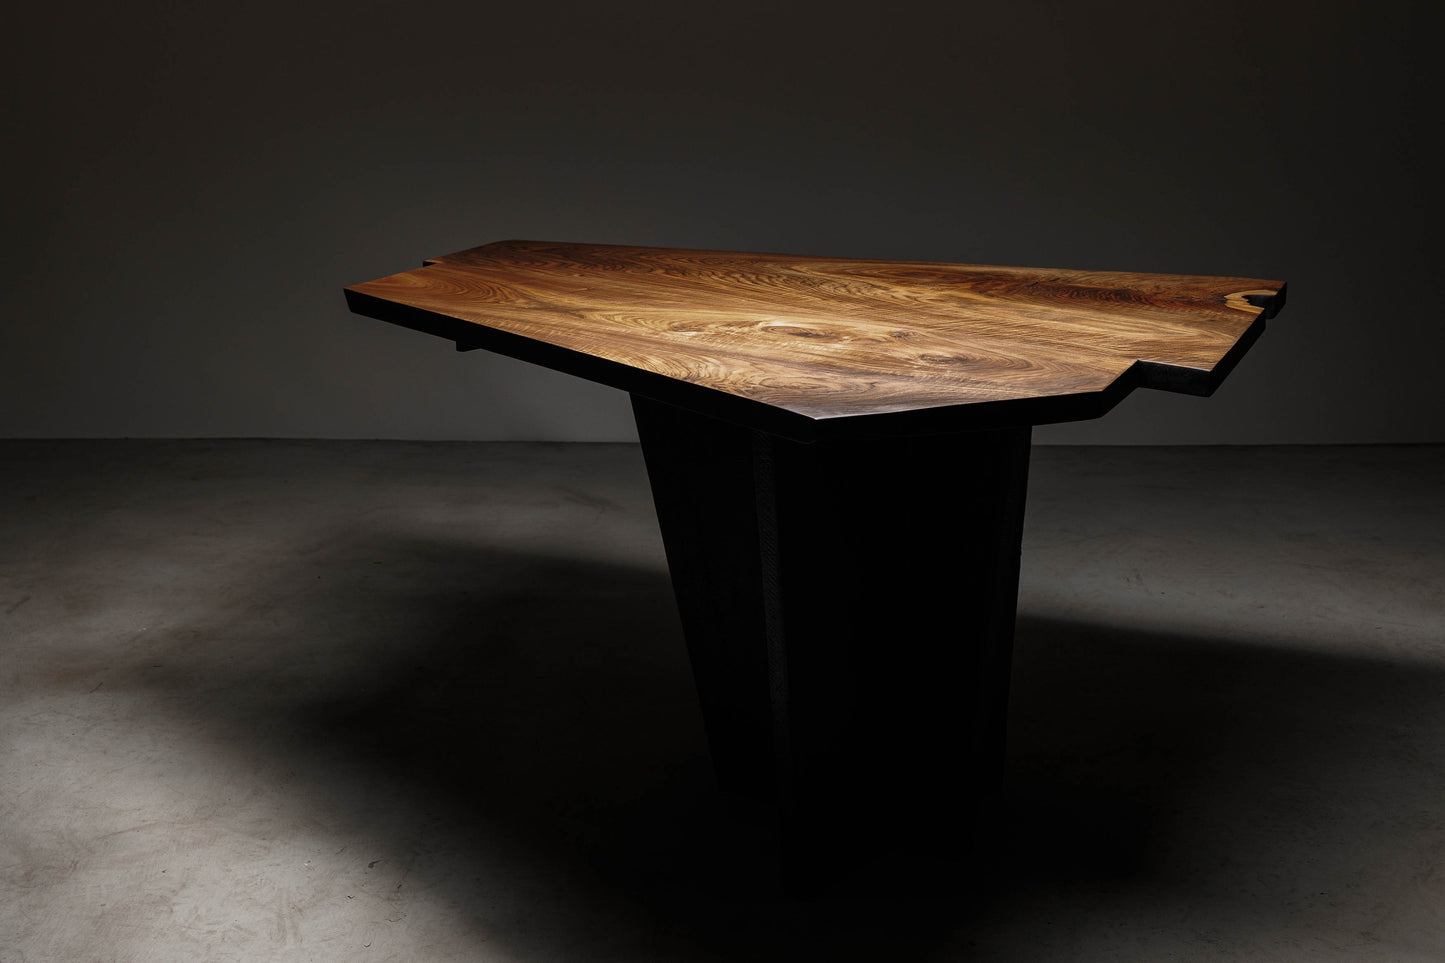 EM205 Of 18Brut Collection | Walnut Dining Table For 4 | Image in ambiental light showcasing the tabletop.